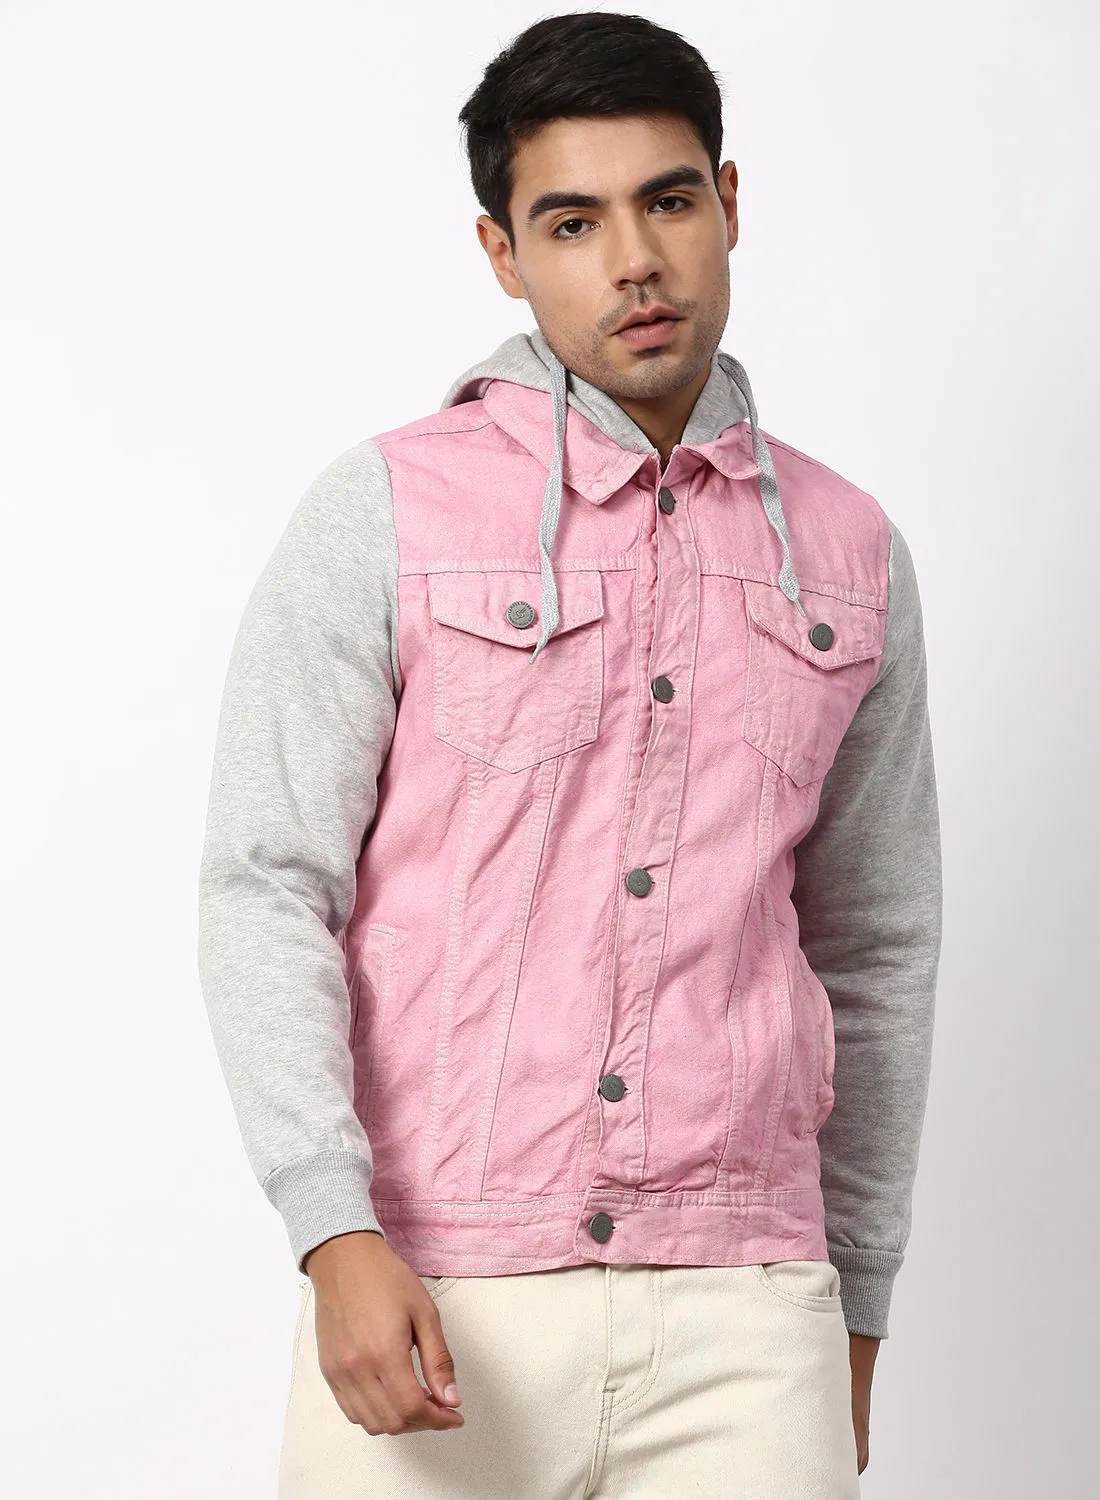 Campus Sutra Outerwear Comfortable Jacket Pink/Grey